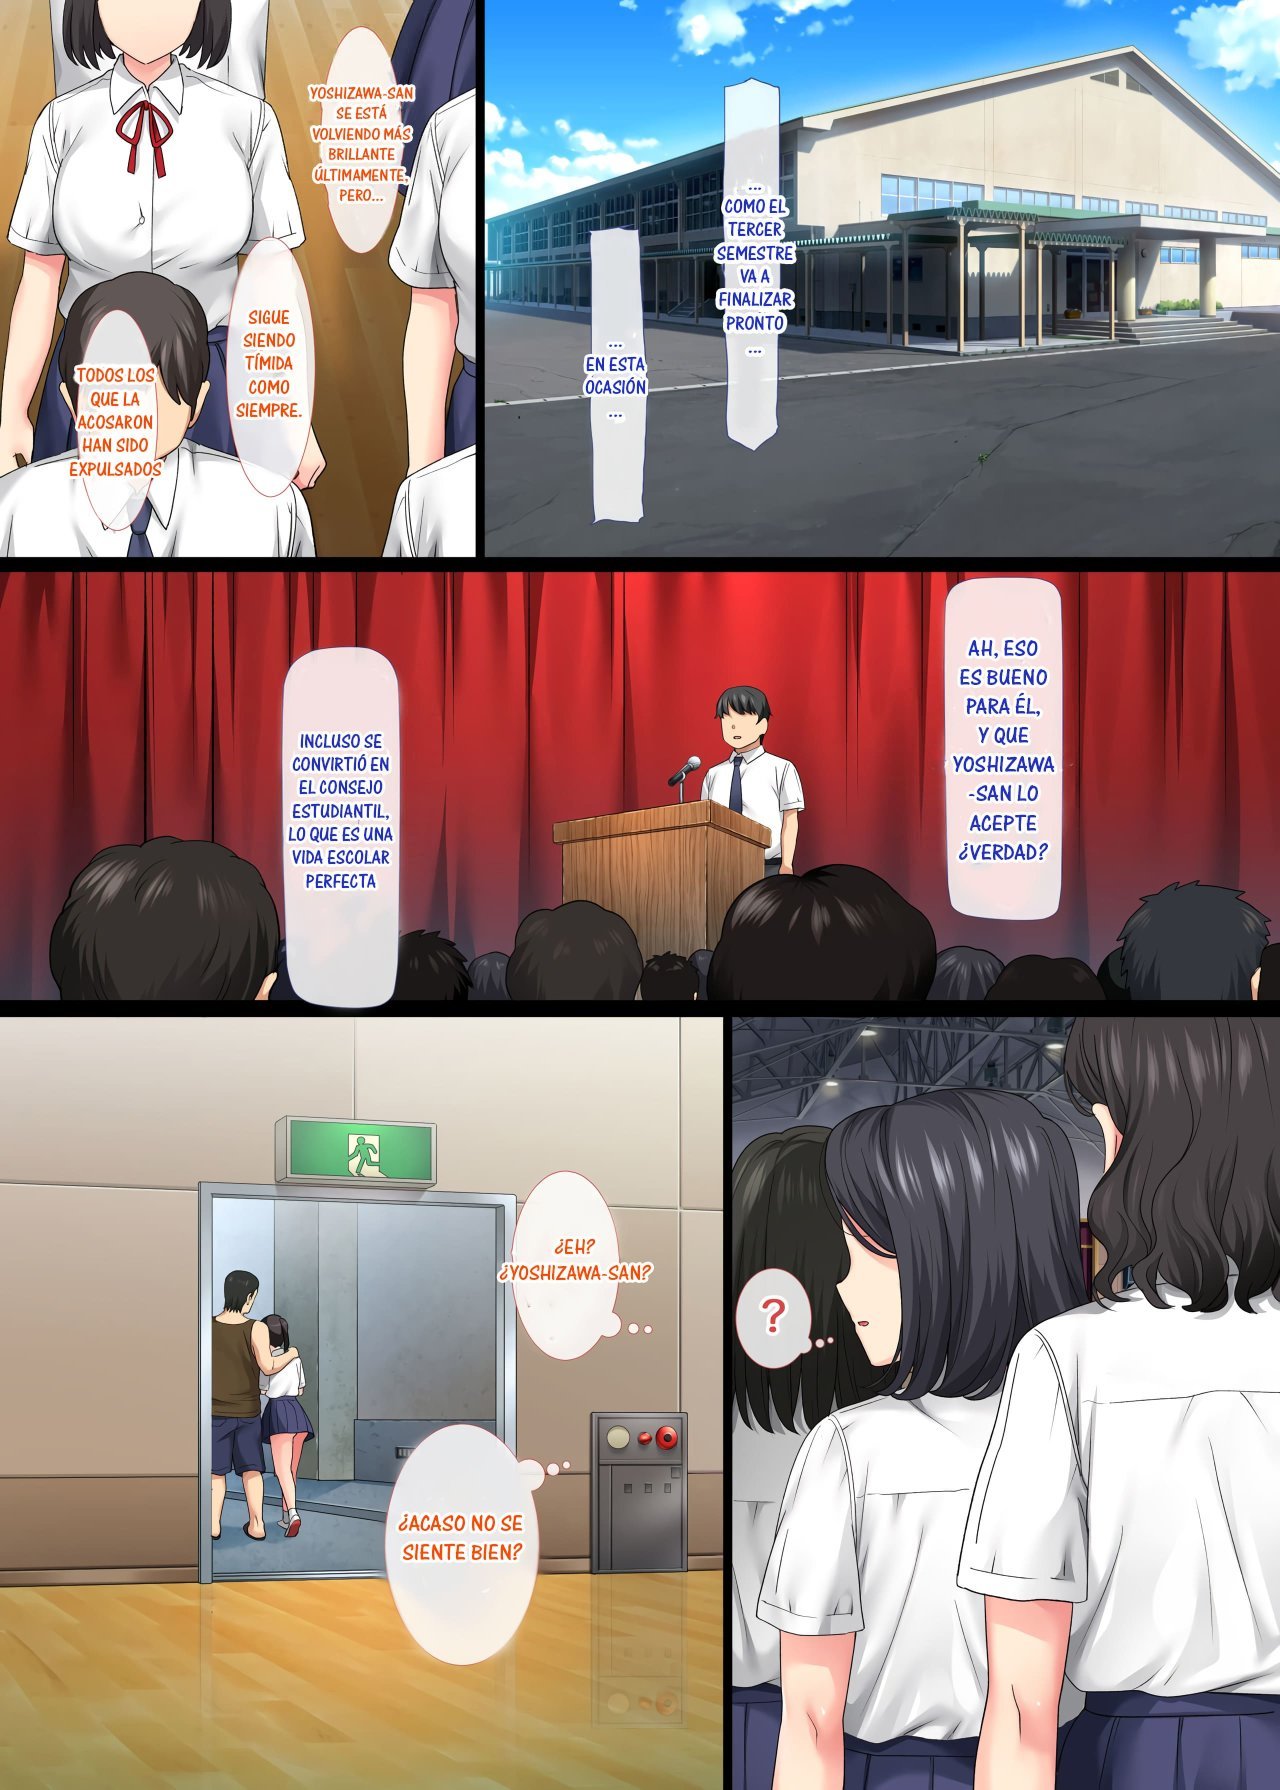 INTROVERTED BEAUTY GETS RAPED OVER AND OVER BY HER HOMEROOM TEACHER 3 - FINAL - 3